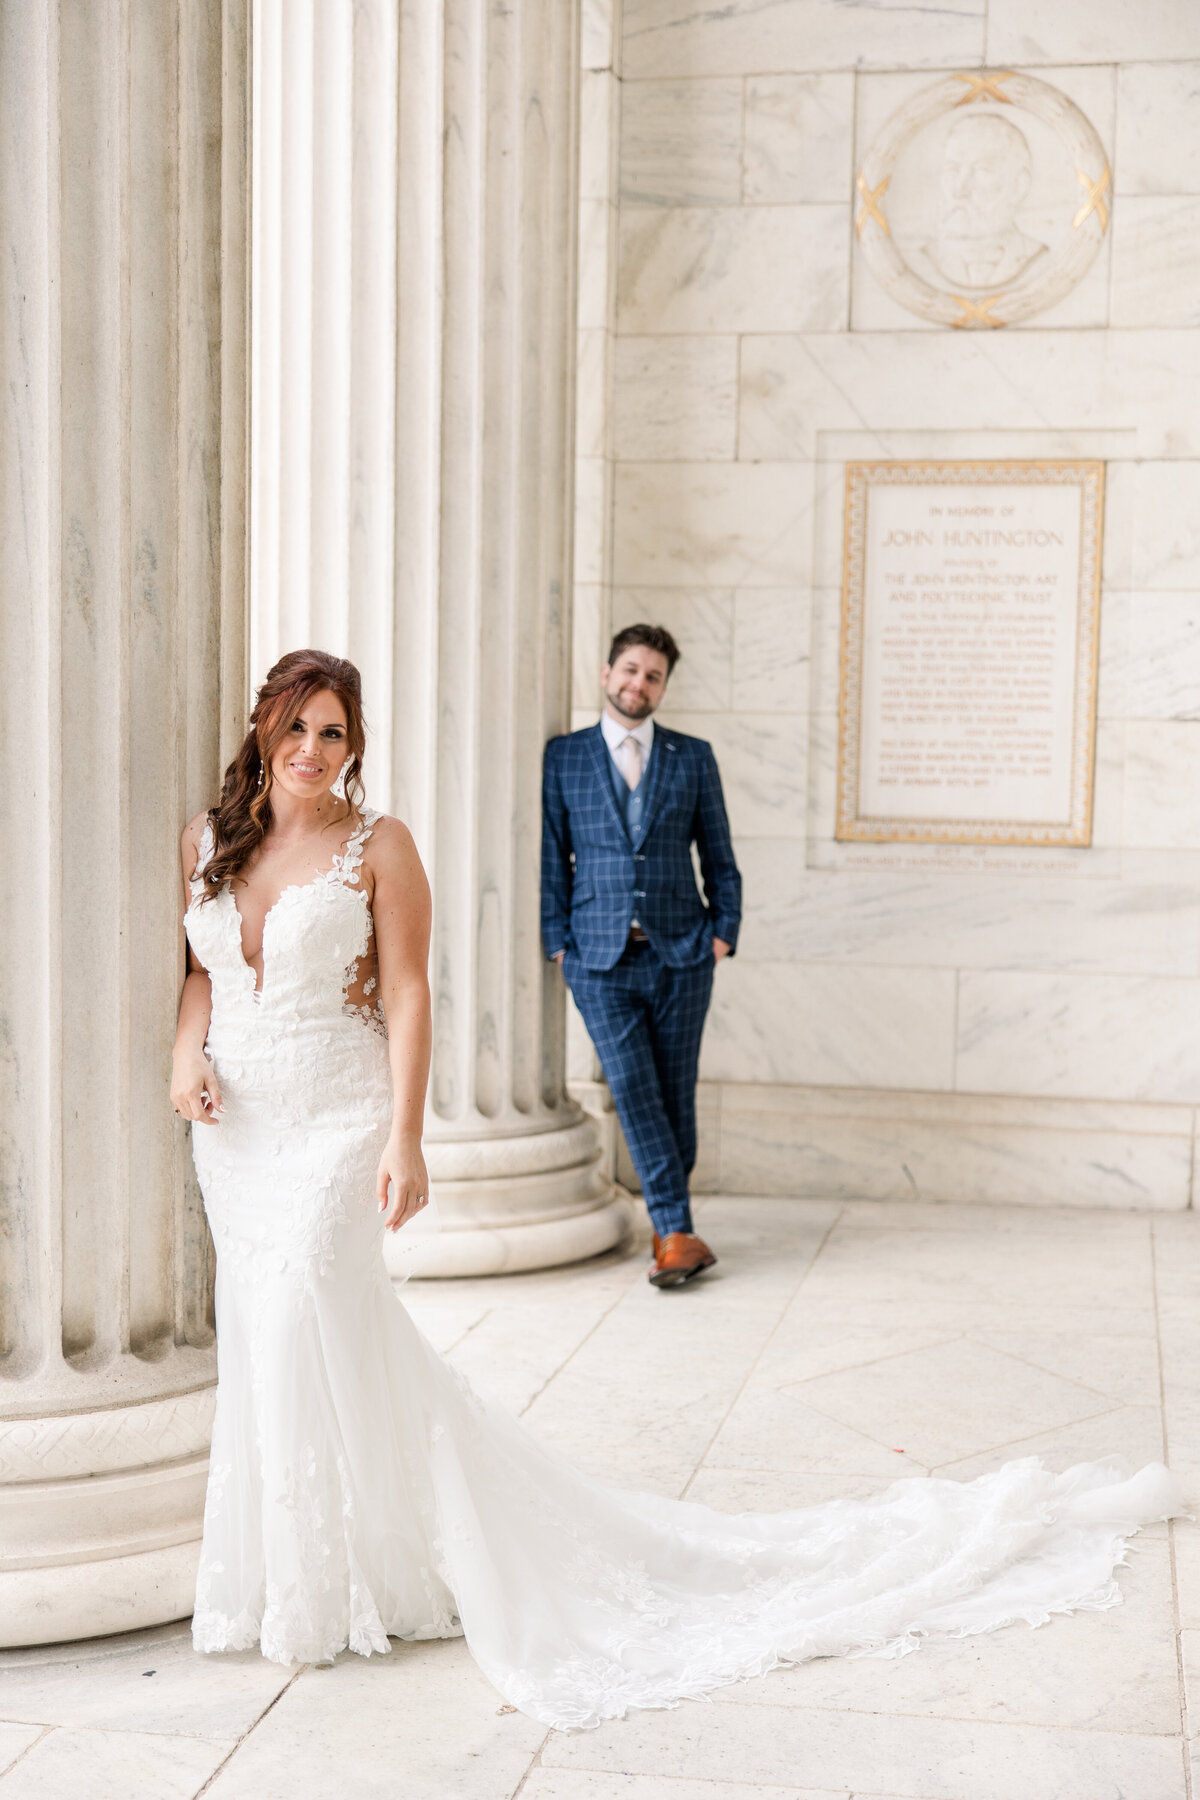 Bride & Groom Photos at front entrance of Cleveland Art Museum